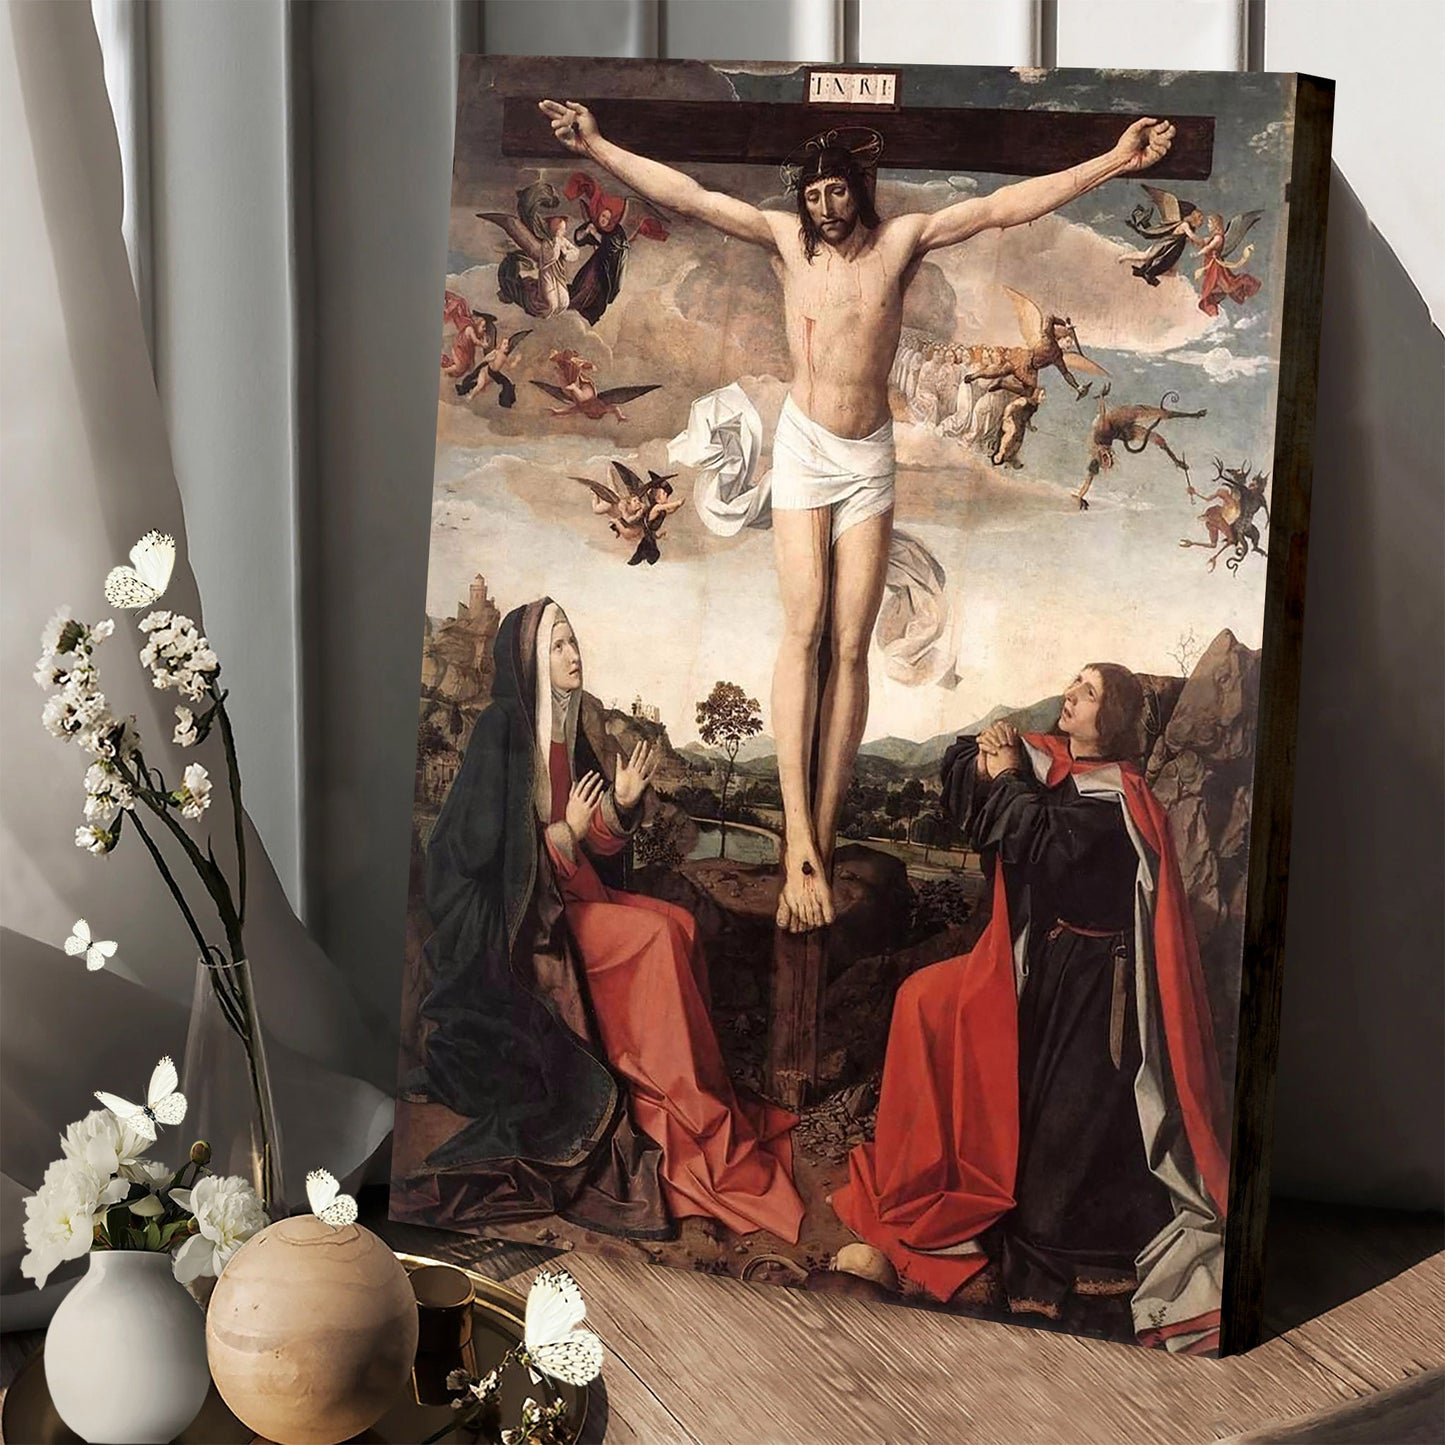 Jesus On The Cross Canvas Picture - Jesus Christ Canvas Art - Christian Wall Canvas